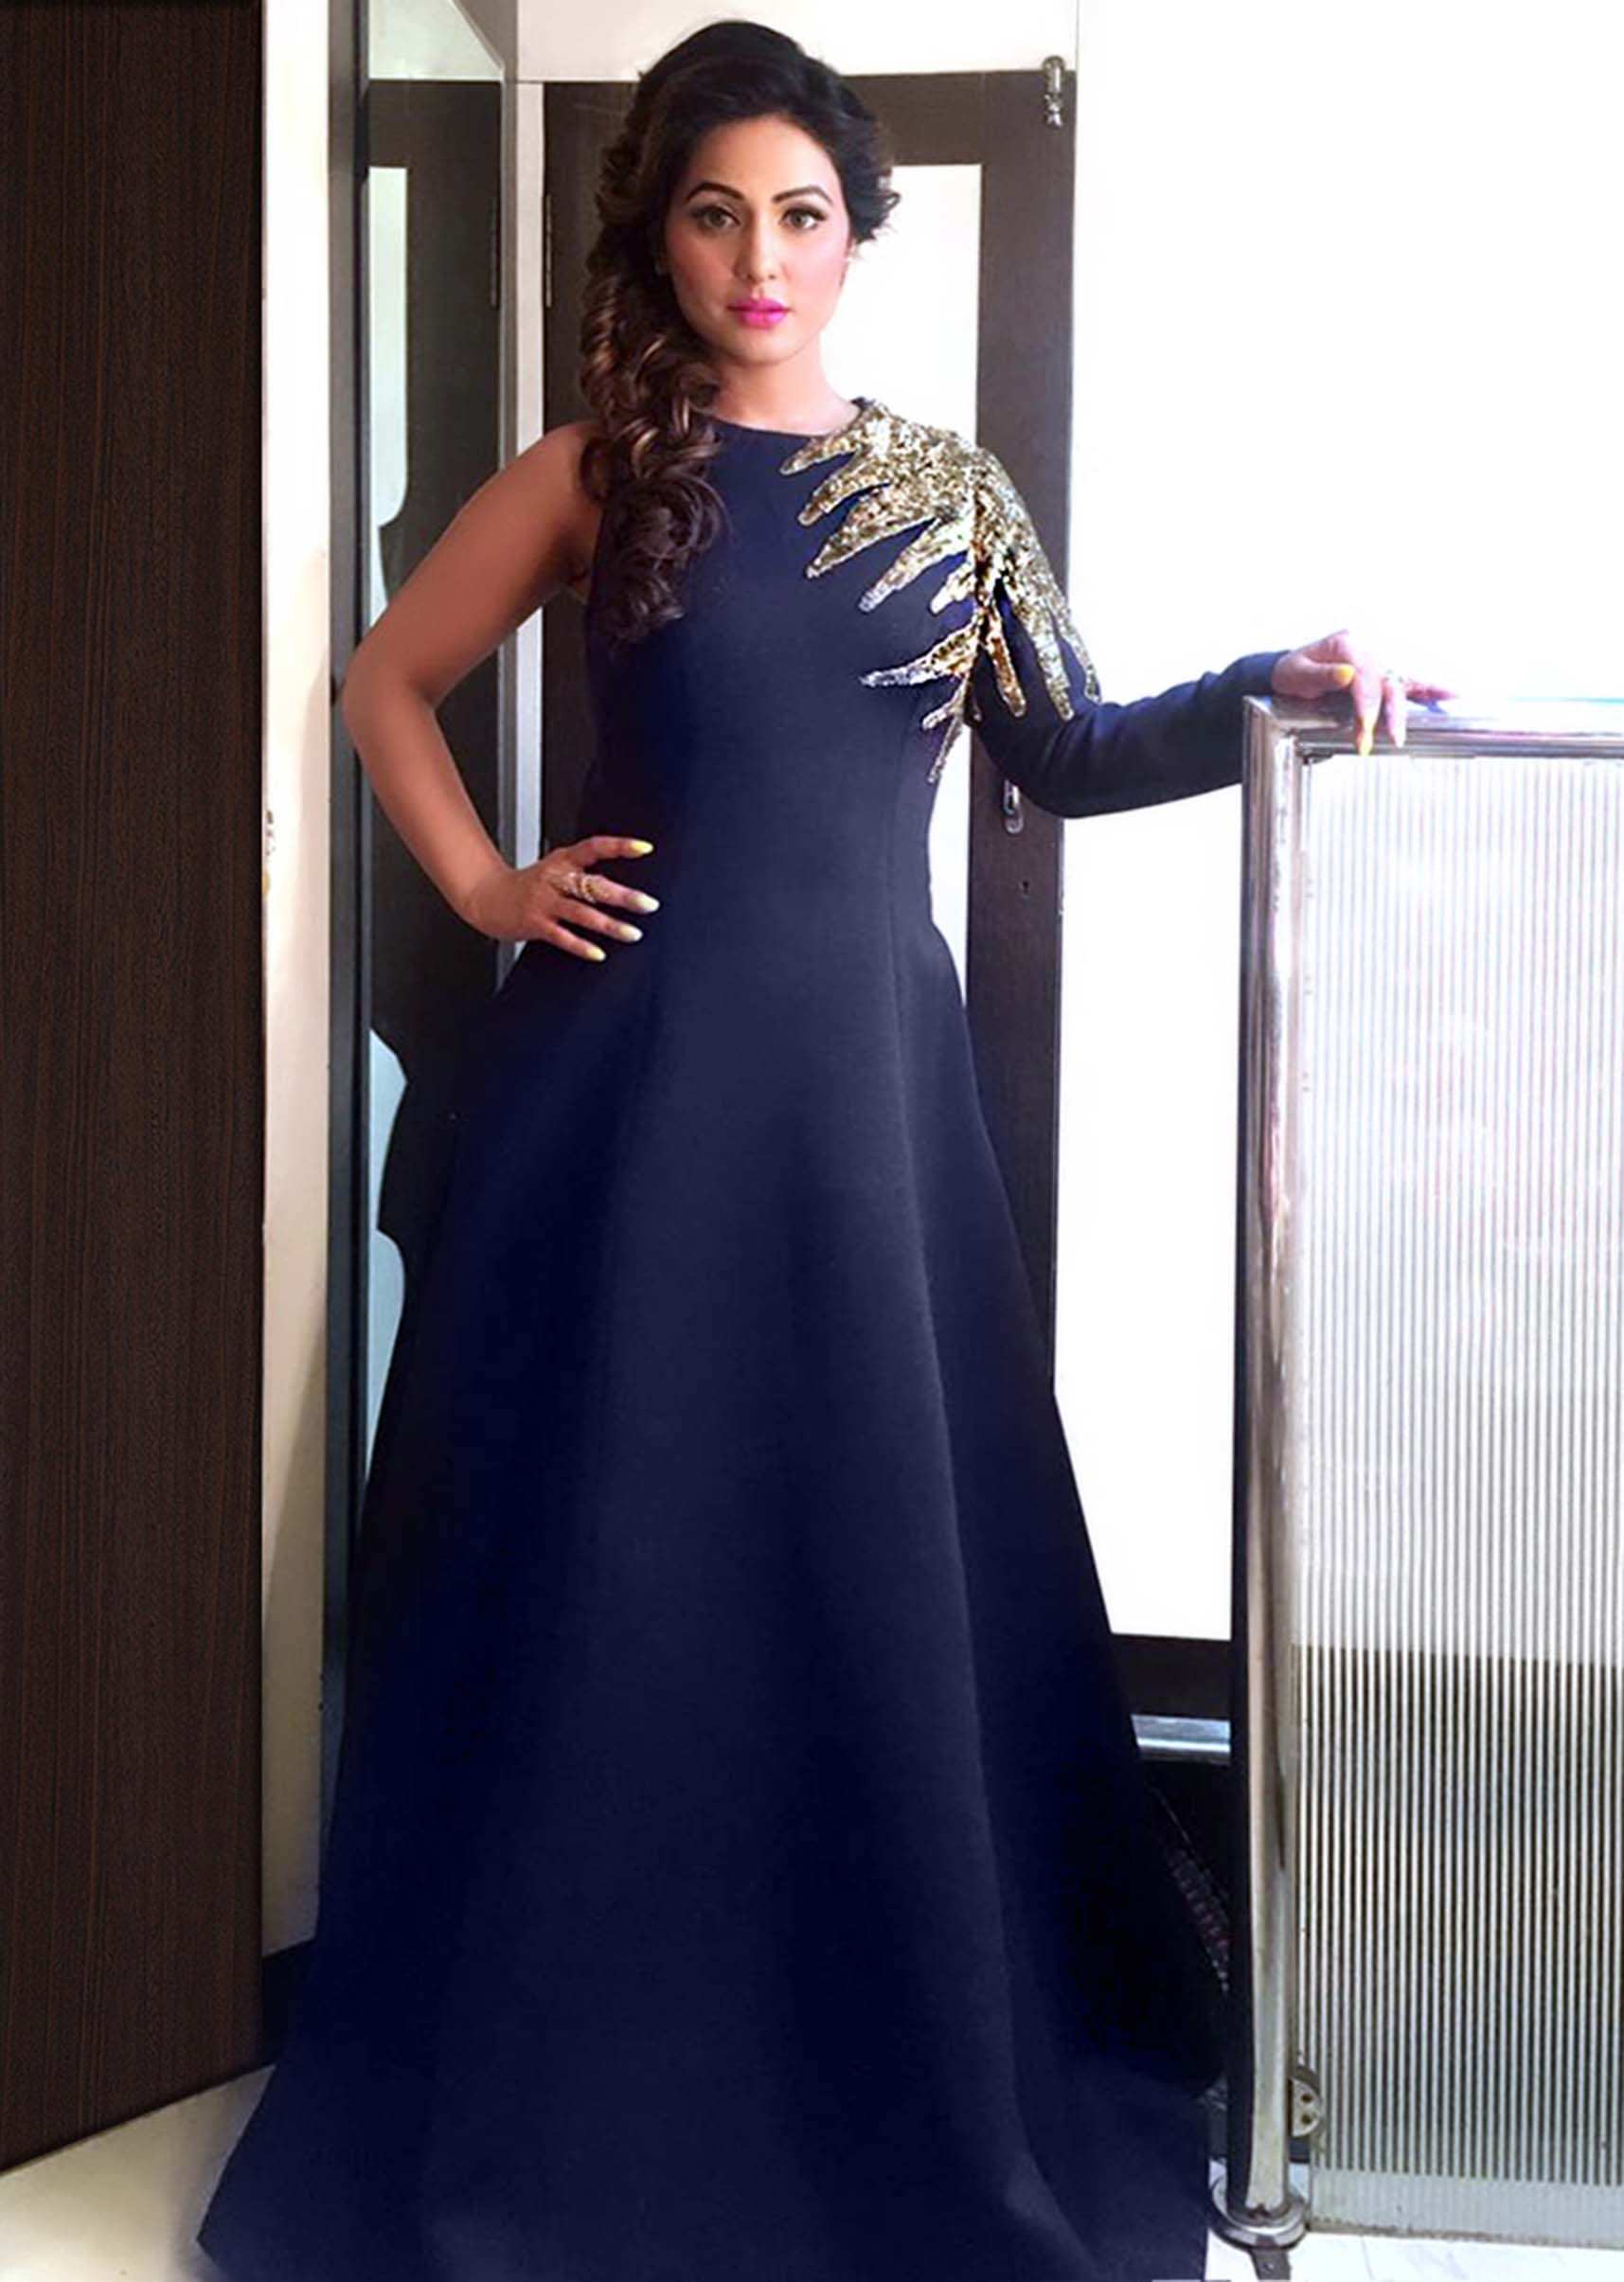 Hina Khan in kalki navy blue gown in sequin embroidered yoke